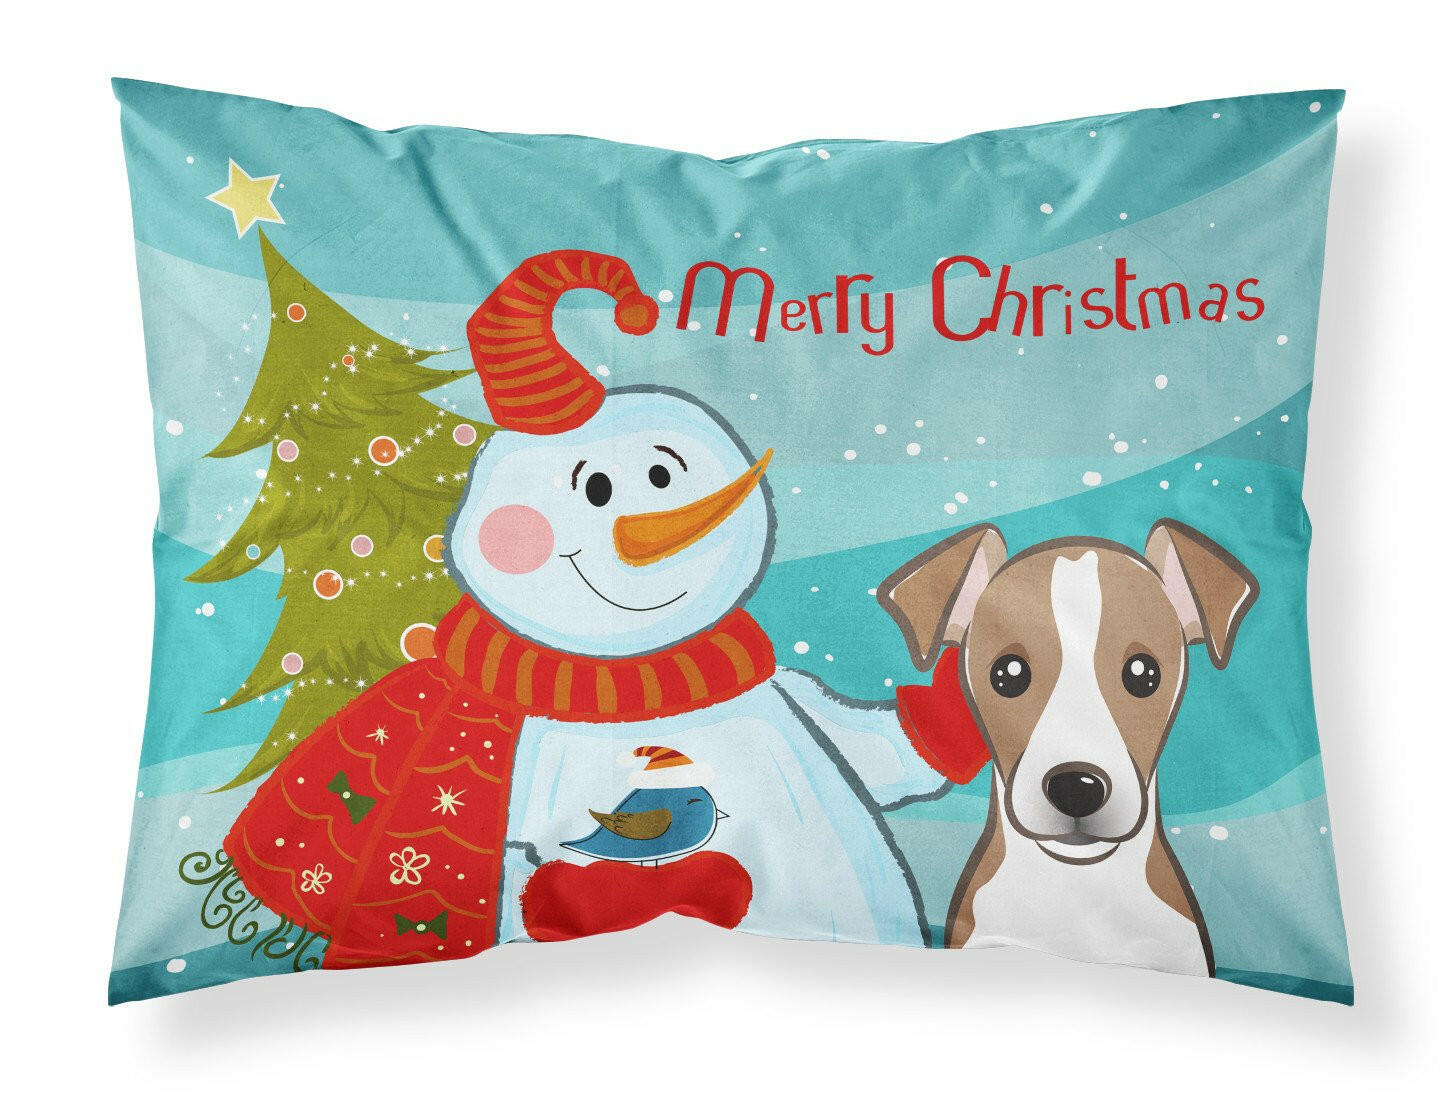 Snowman with Jack Russell Terrier Fabric Standard Pillowcase BB1880PILLOWCASE by Caroline's Treasures